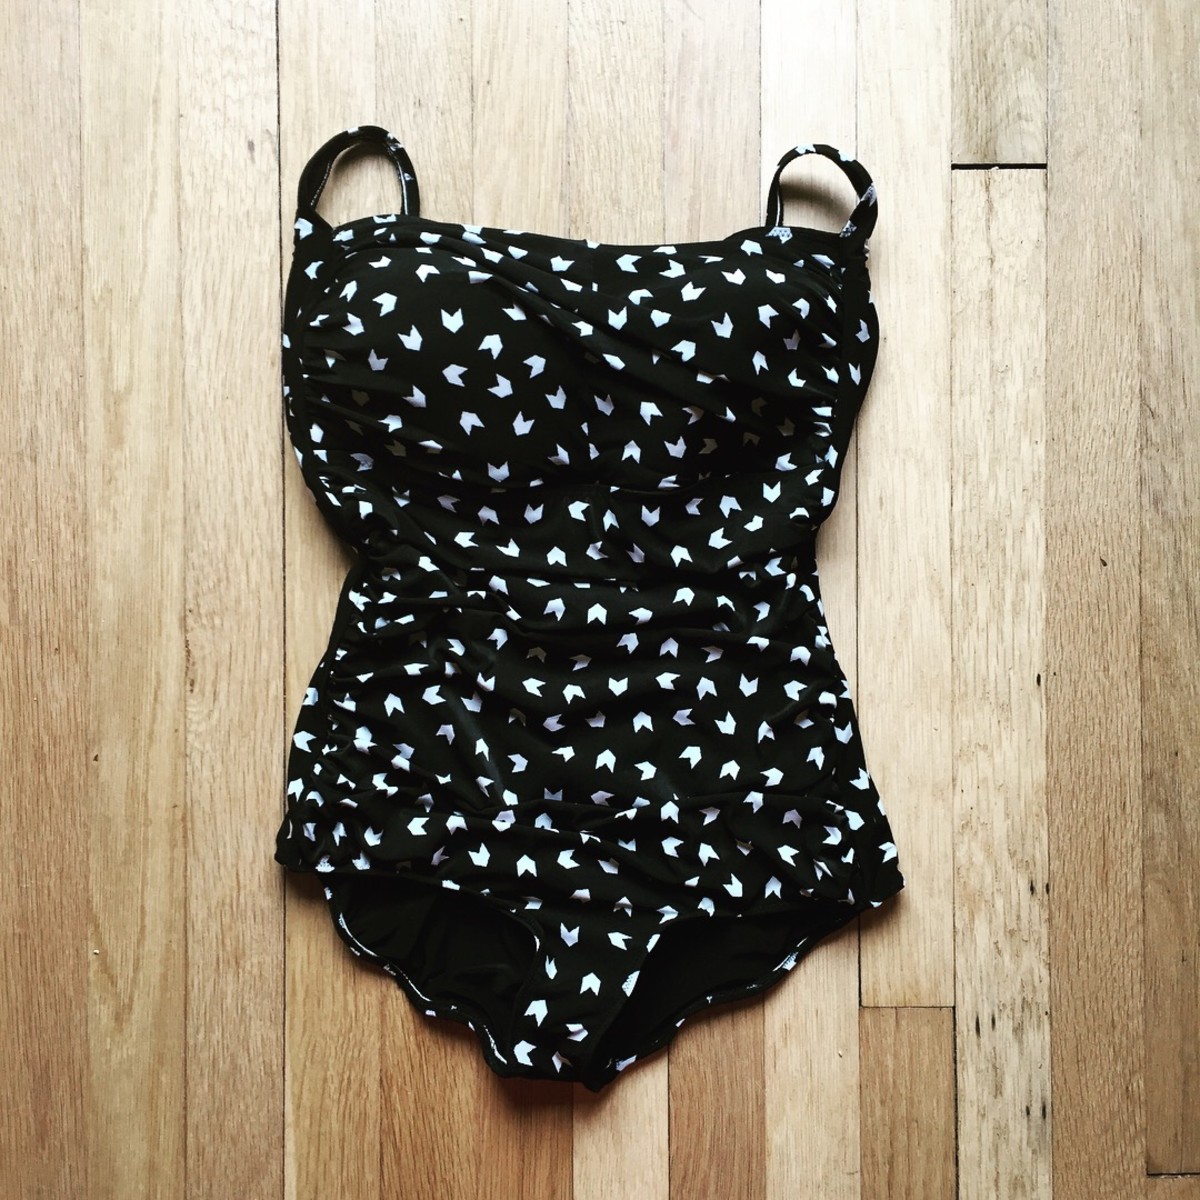 A ruched swimsuit in a fun print.